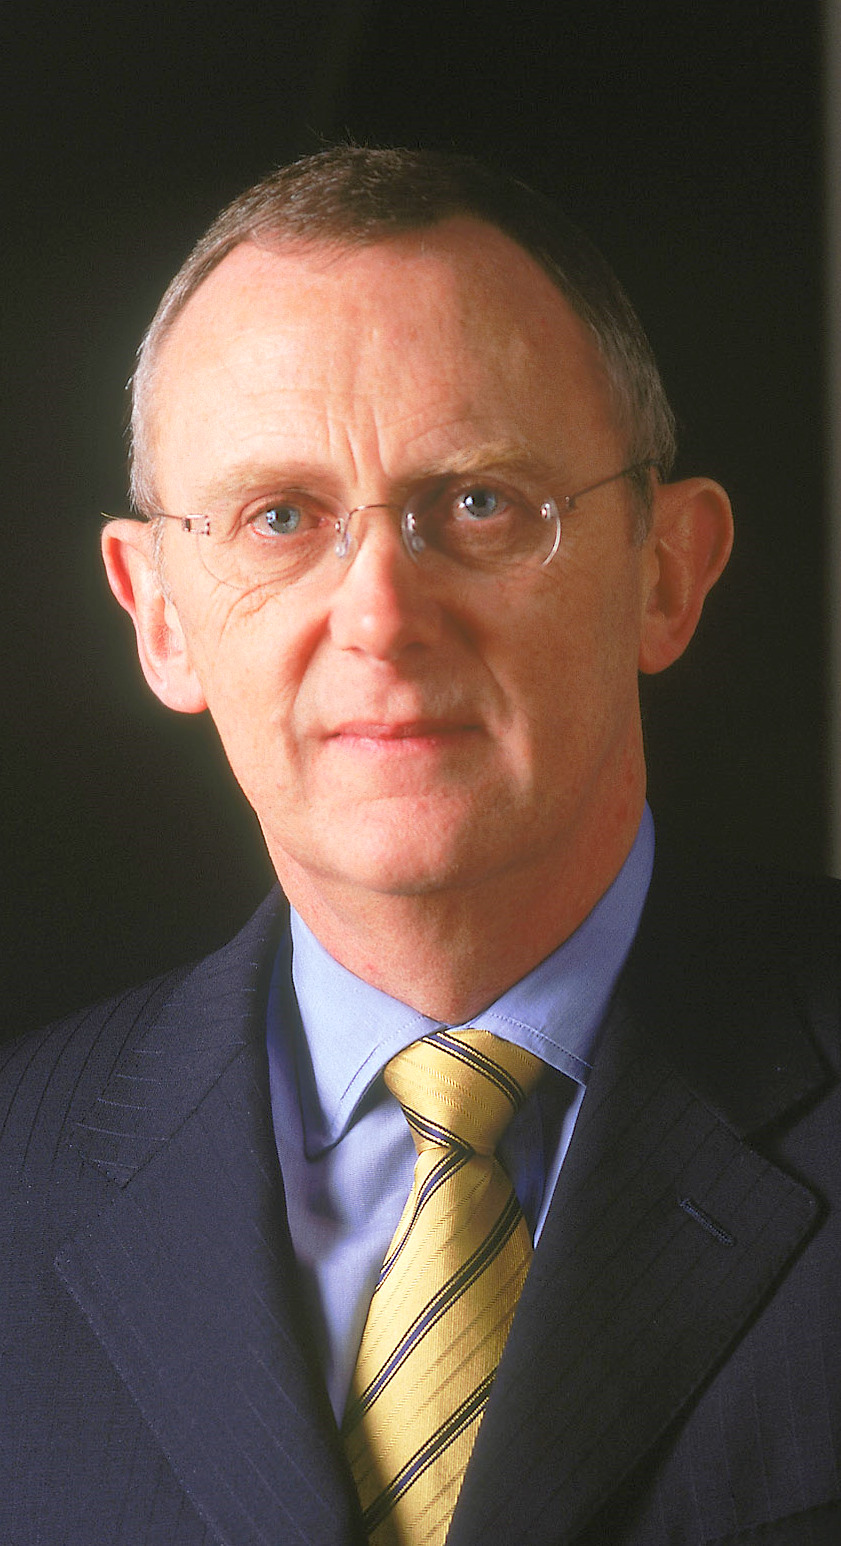 Introducing the new CEPI Chairman: Gary McGann, Group CEO of Smurfit Kappa